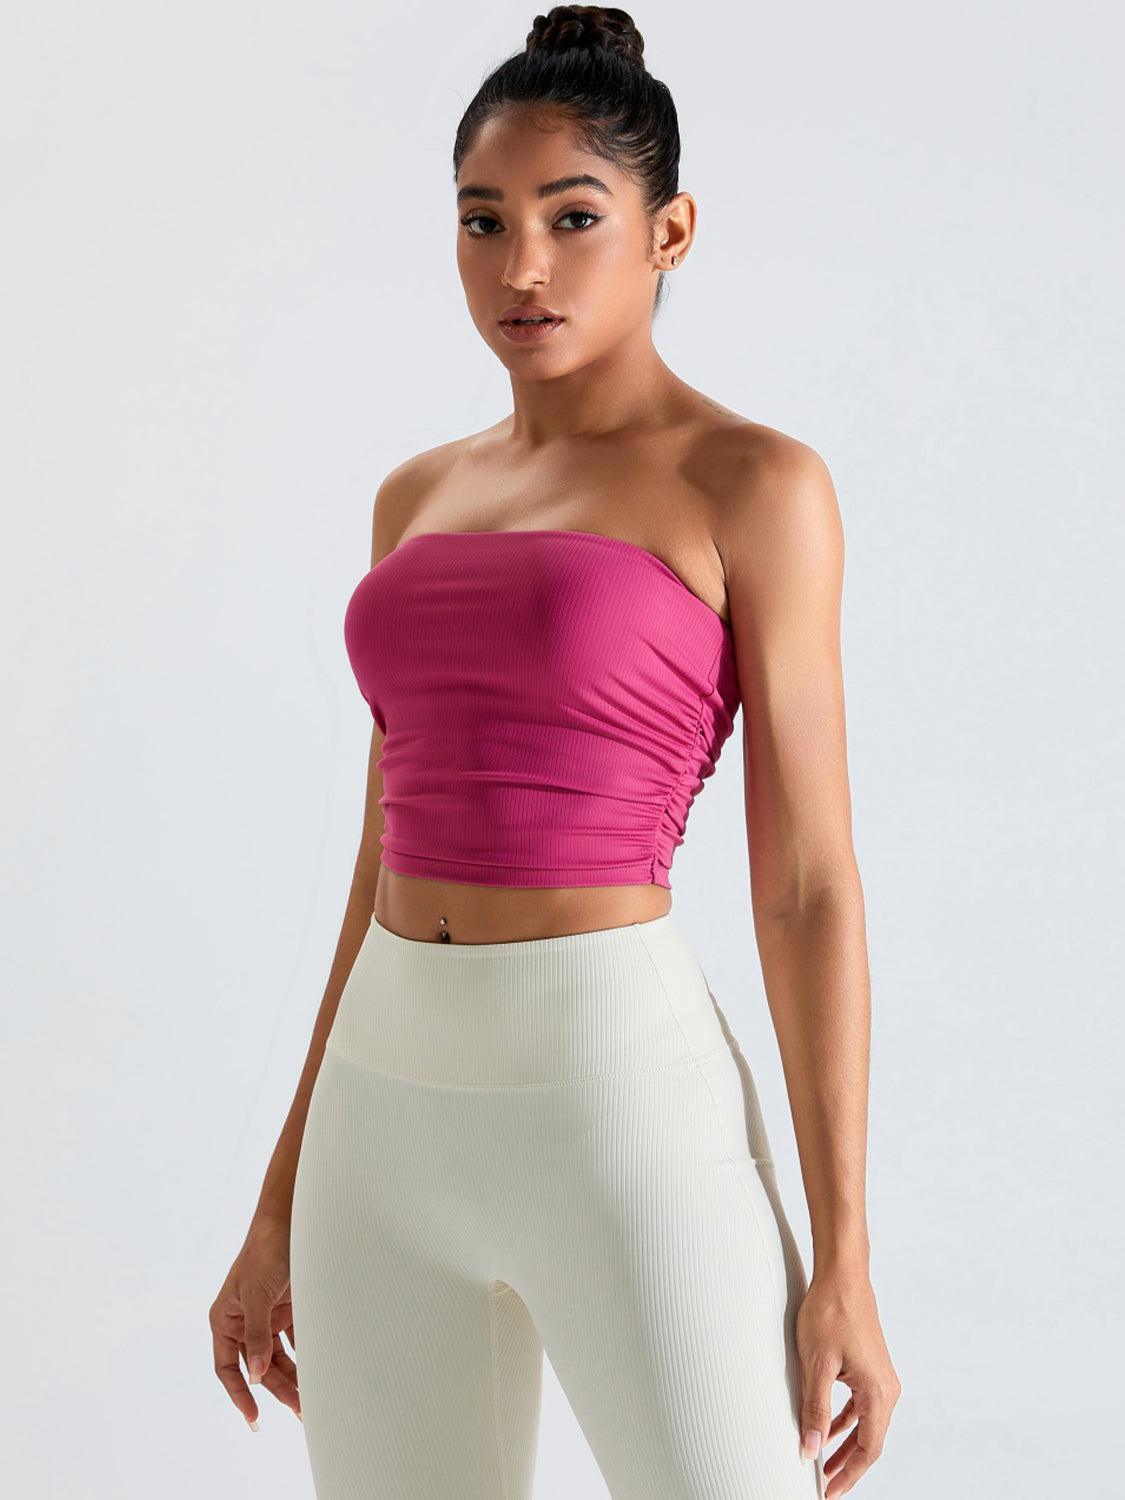 a woman in white pants and a pink top